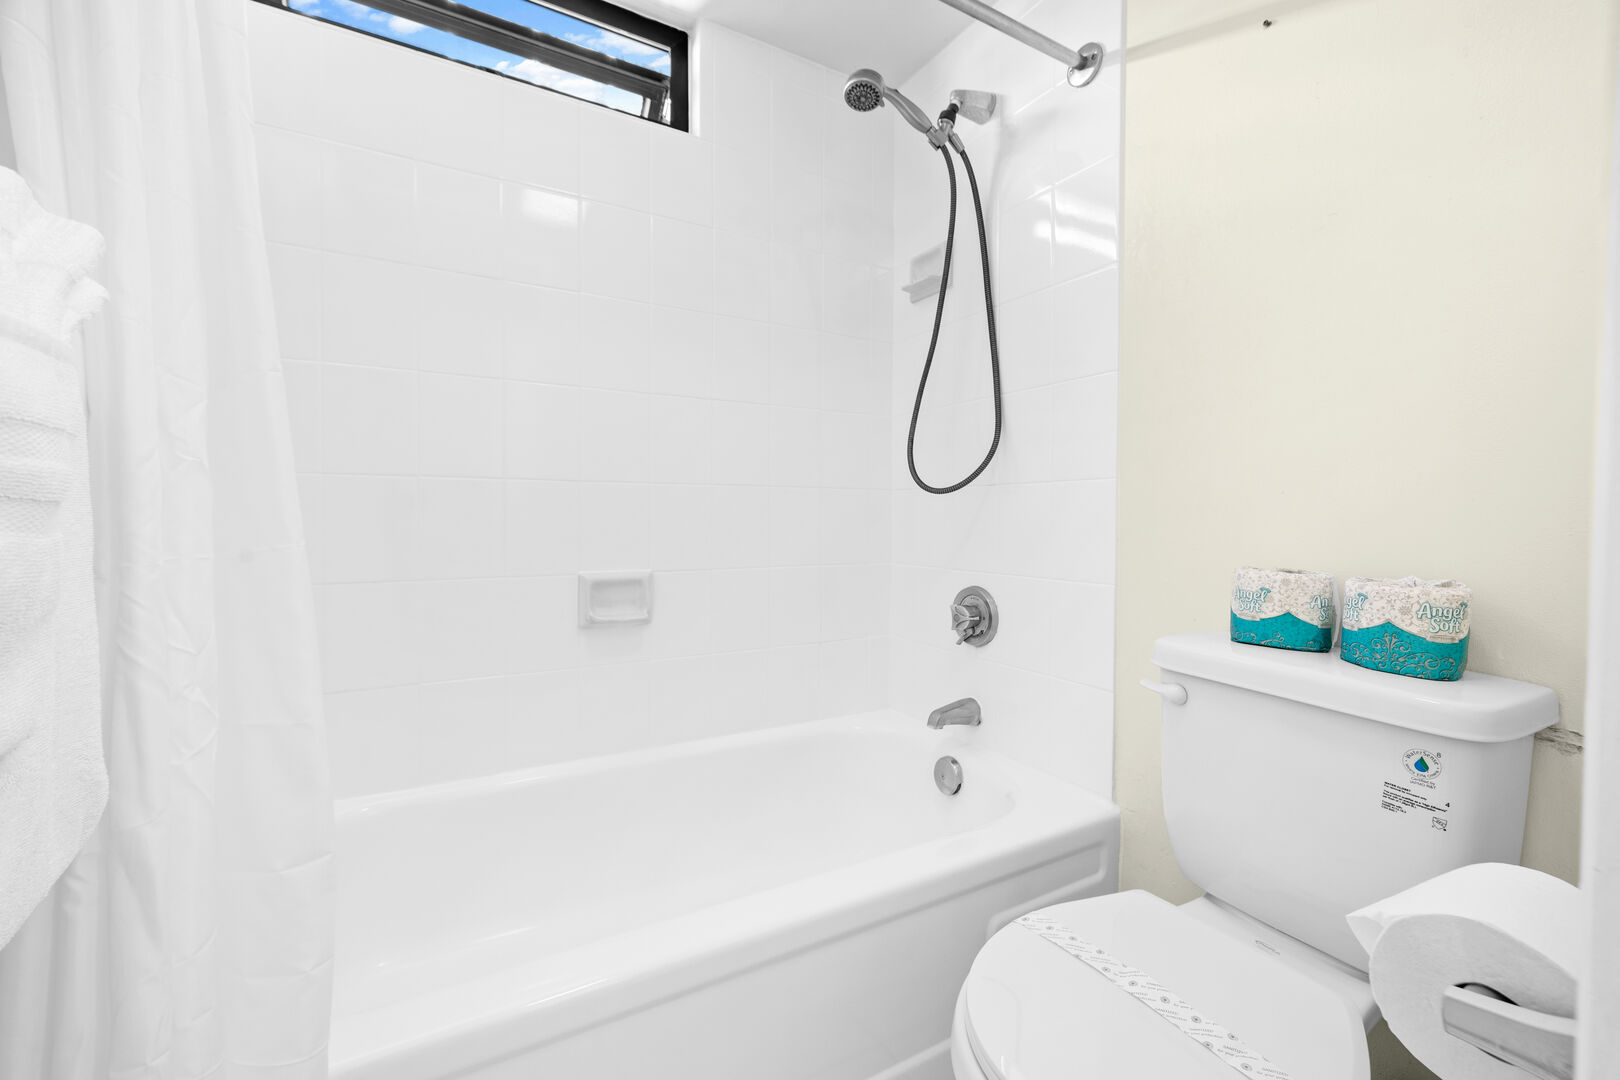 Refreshed in your full bathroom with a tub and shower combination!